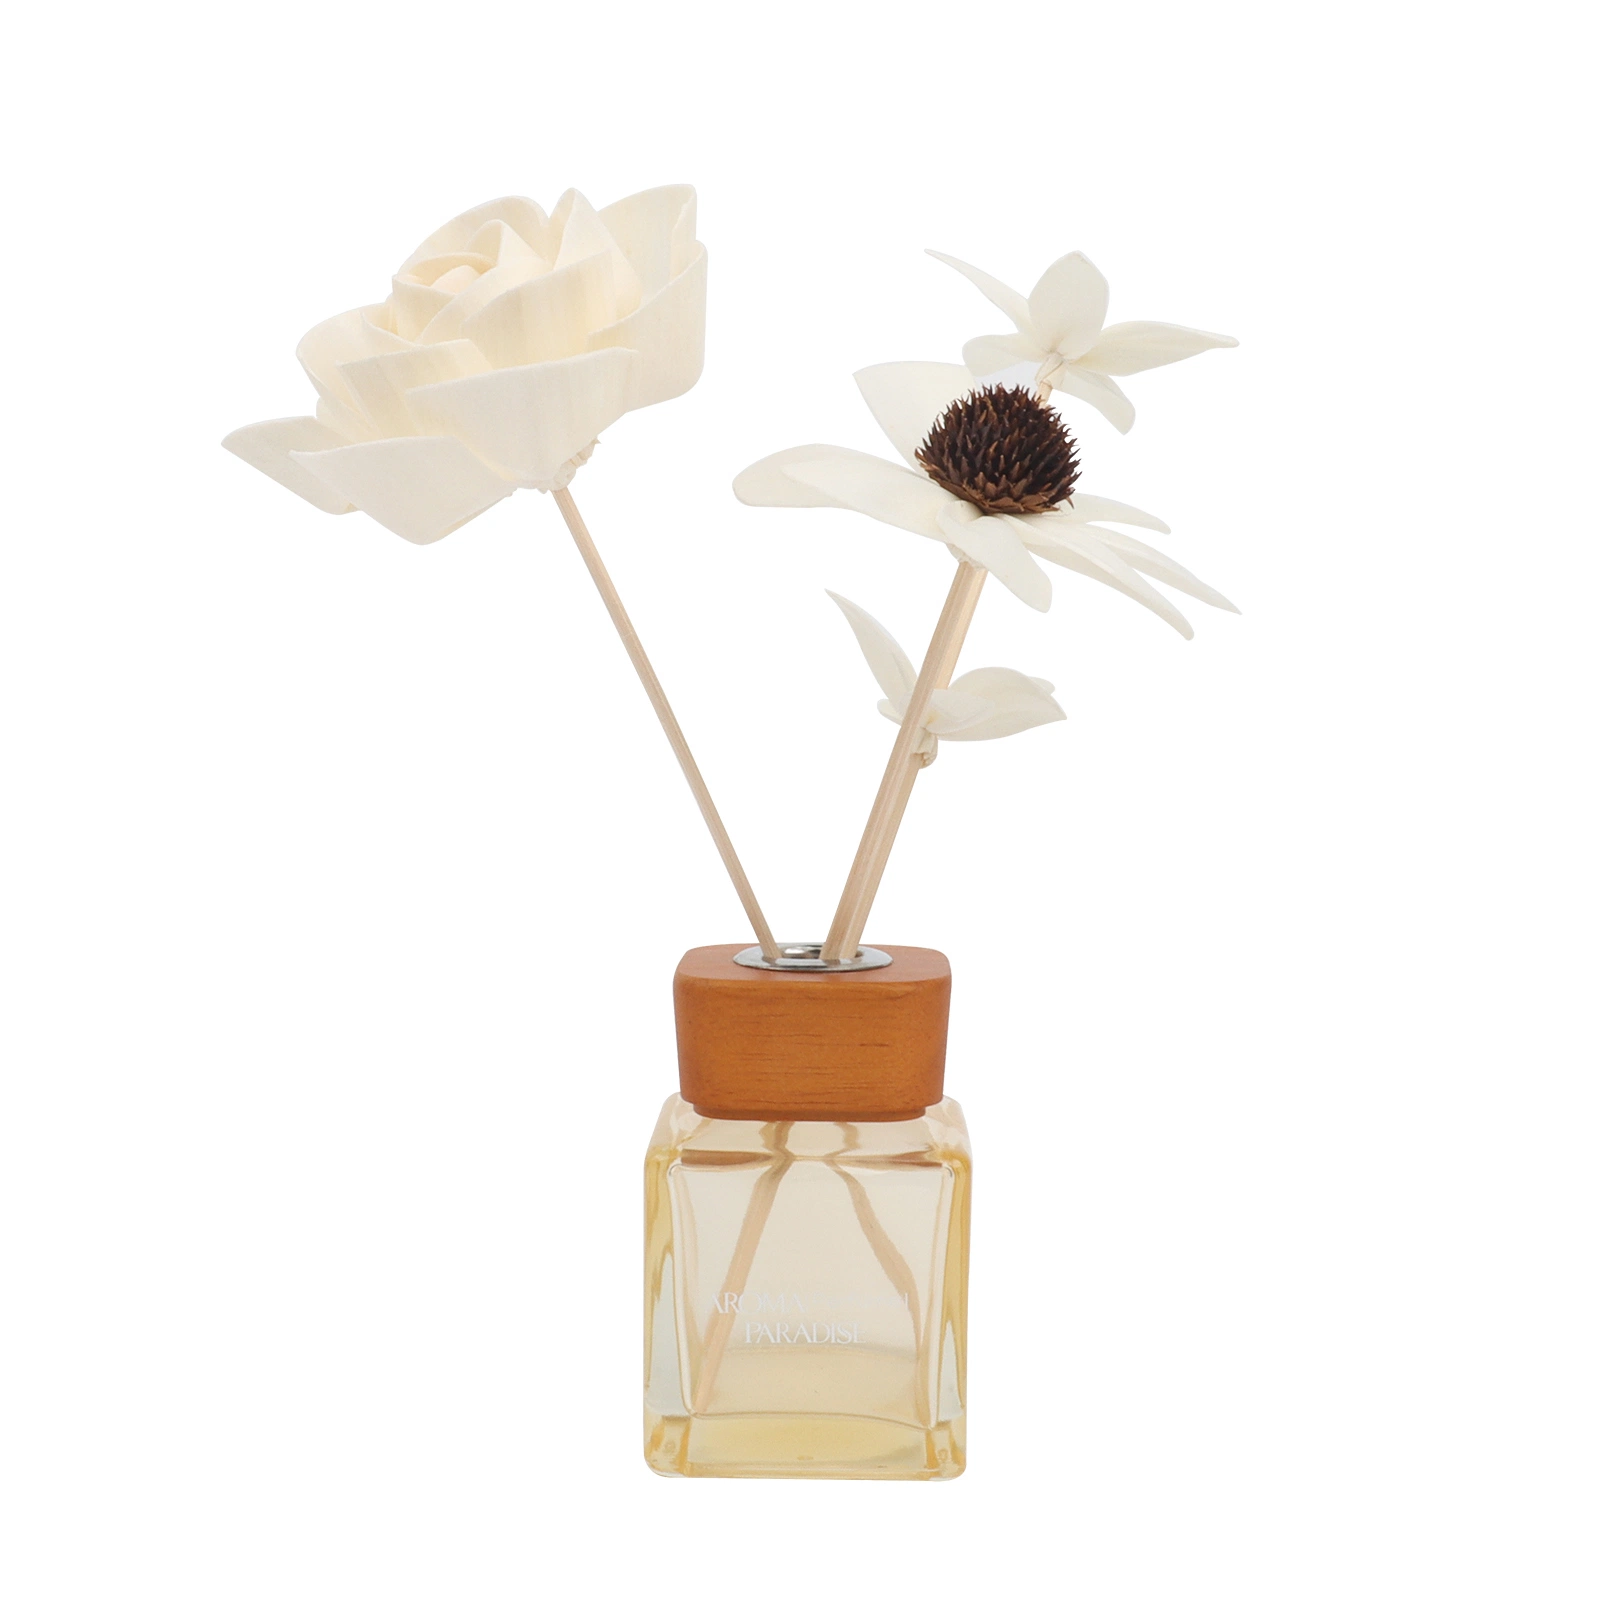 Art Crafts Paper Plant Handmade Wedding Occasiong Banquet Fake Fragrance Diffuser Wood Dried Sola Flower